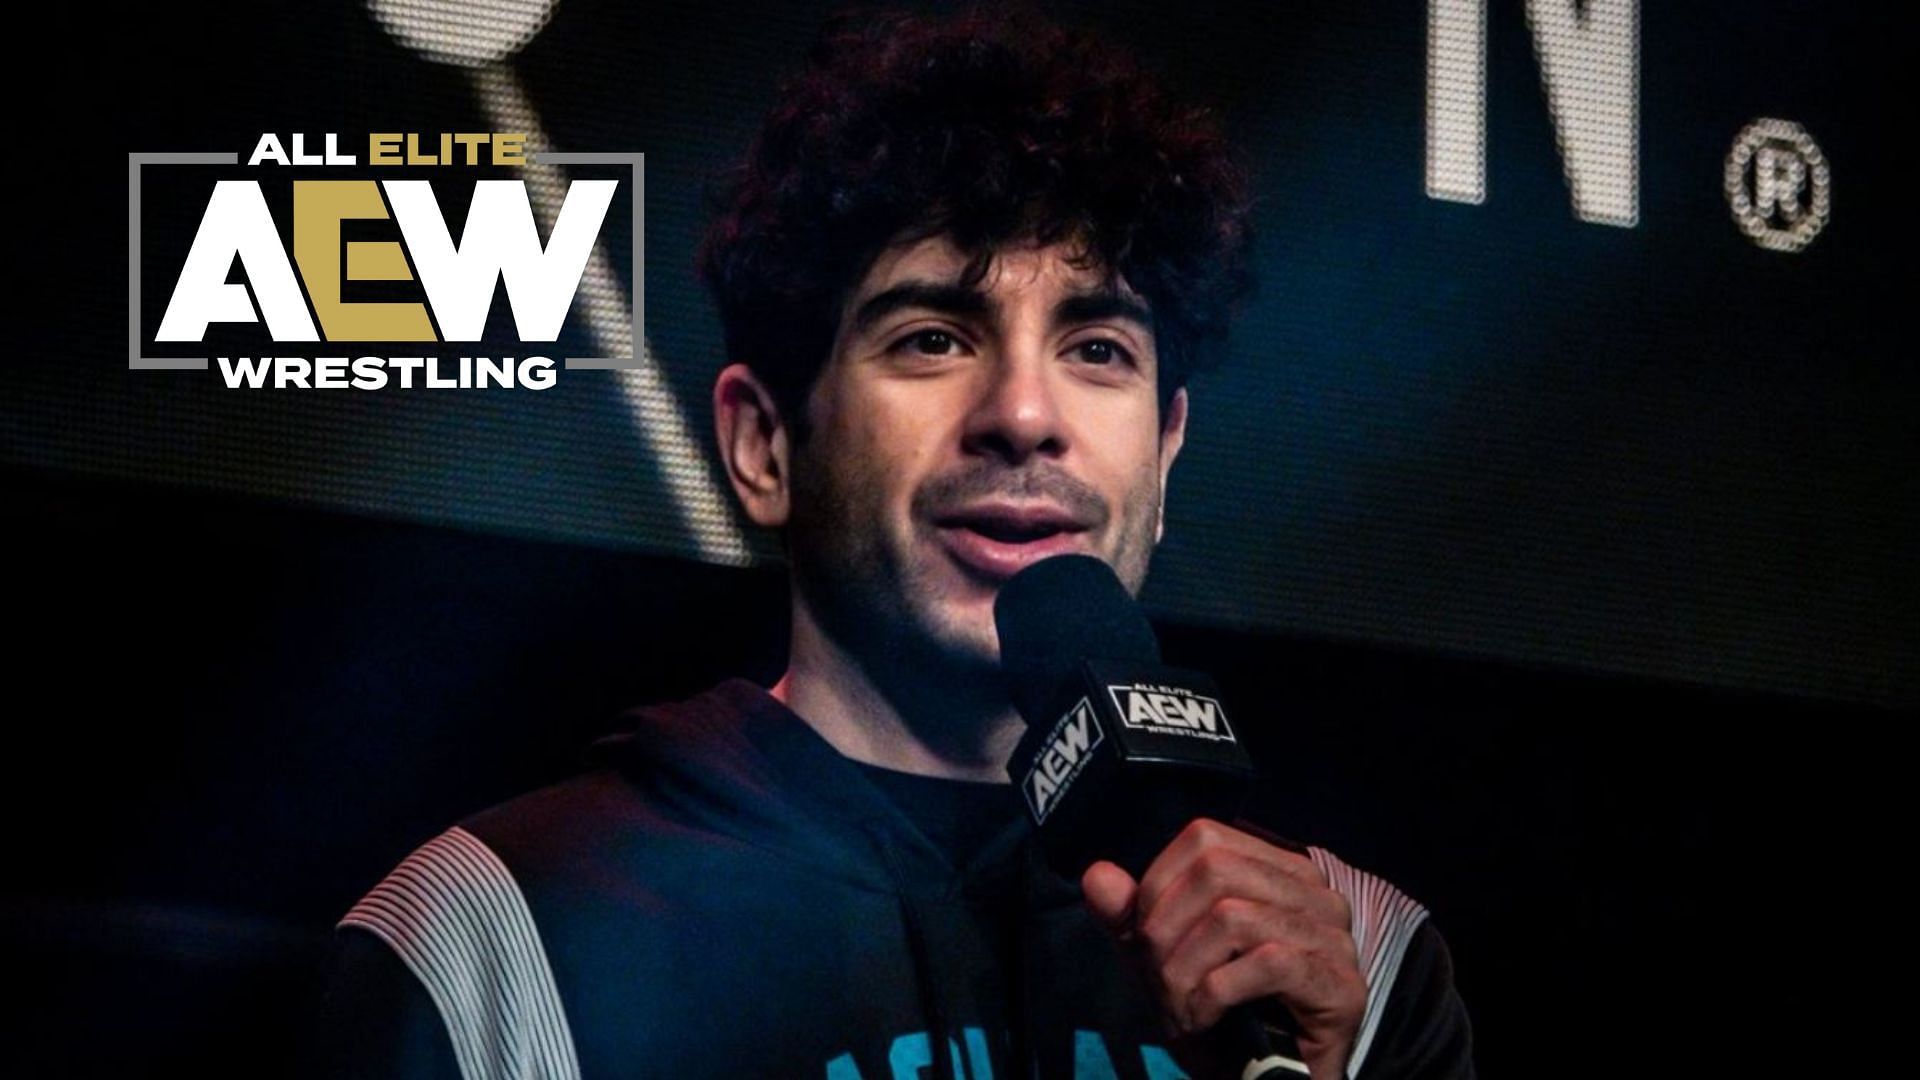 Another star debuts in Tony Khan's AEW